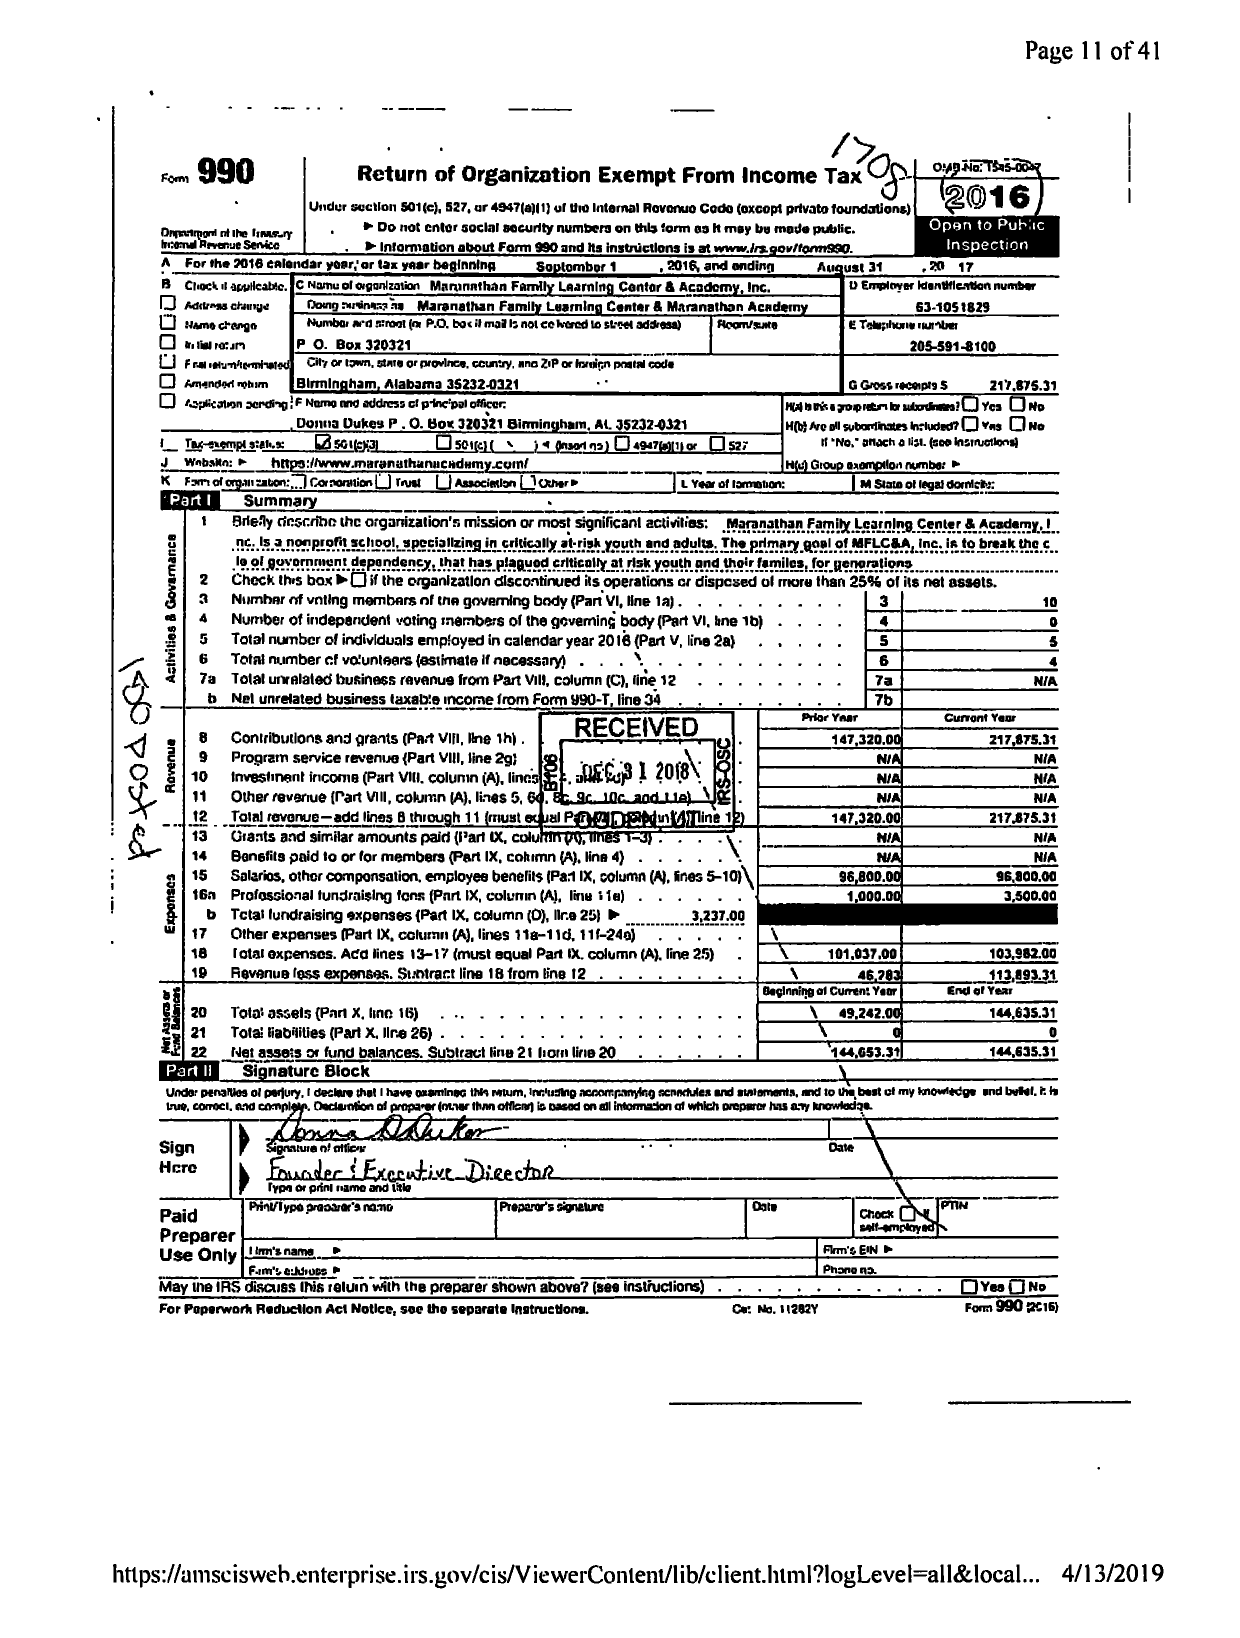 Image of first page of 2016 Form 990R for Maranathan Family Learning Center and Academy